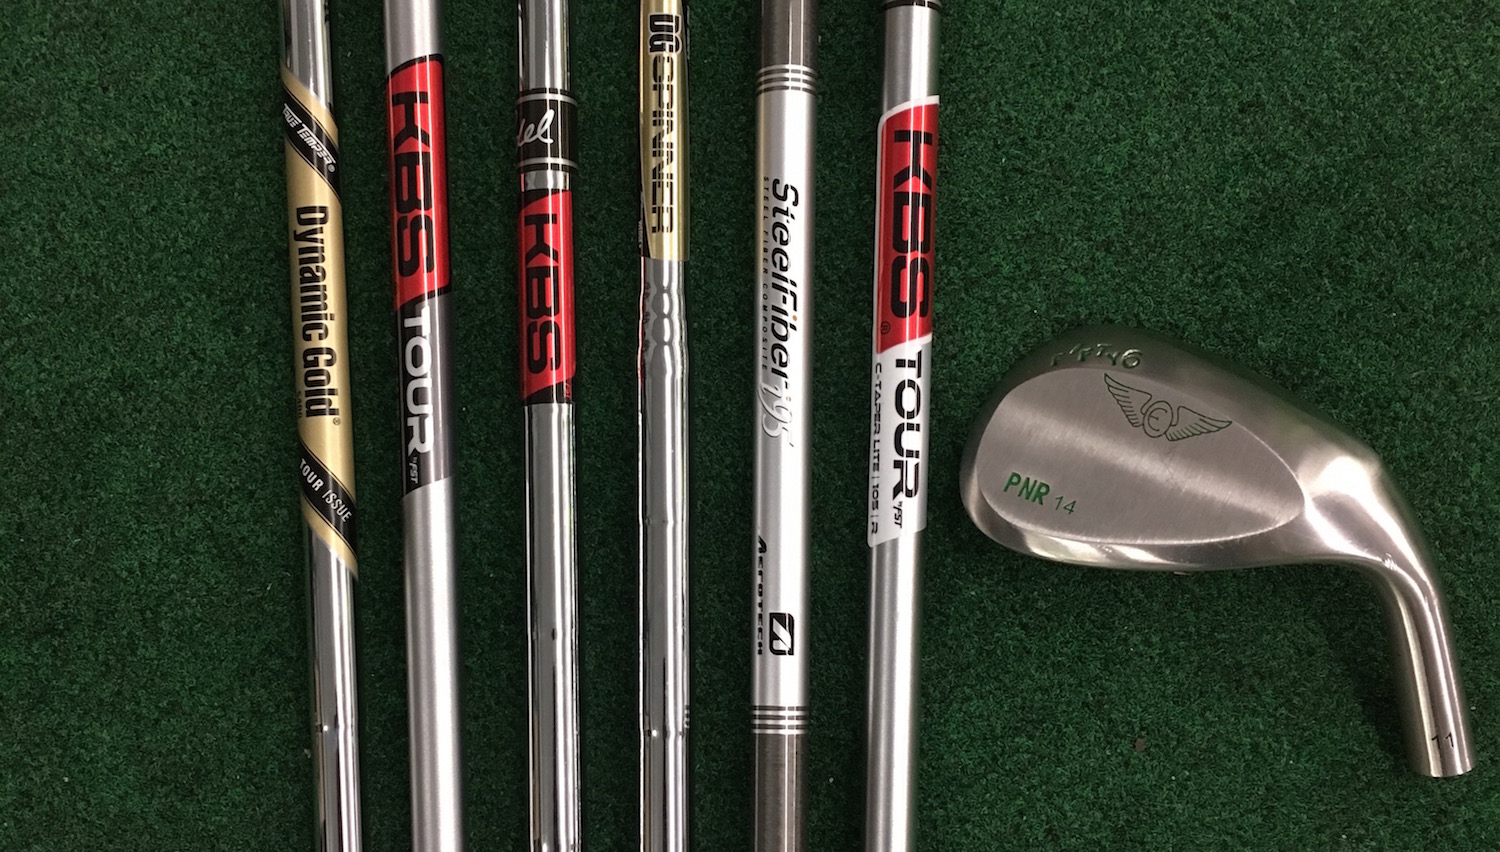 Finding the right wedge shaft for your game – GolfWRX